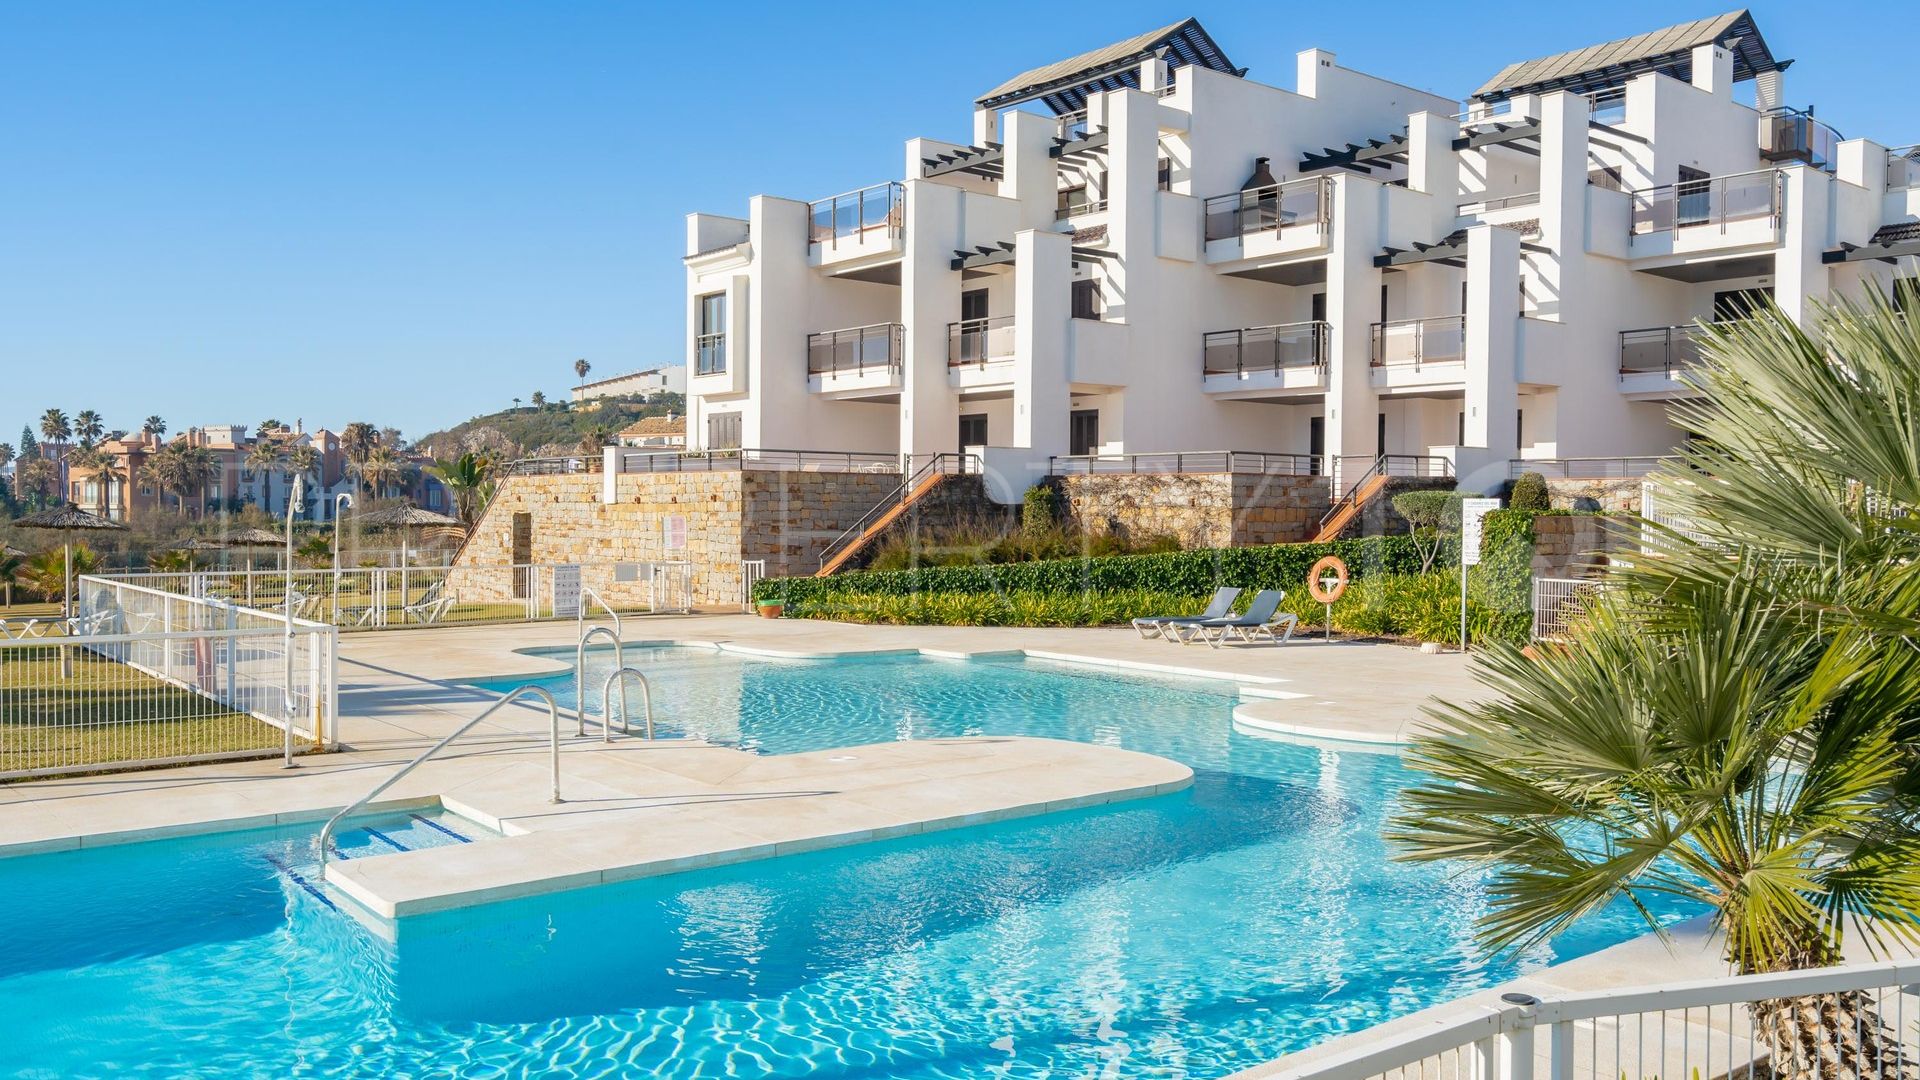 For sale Casares del Mar ground floor apartment with 2 bedrooms